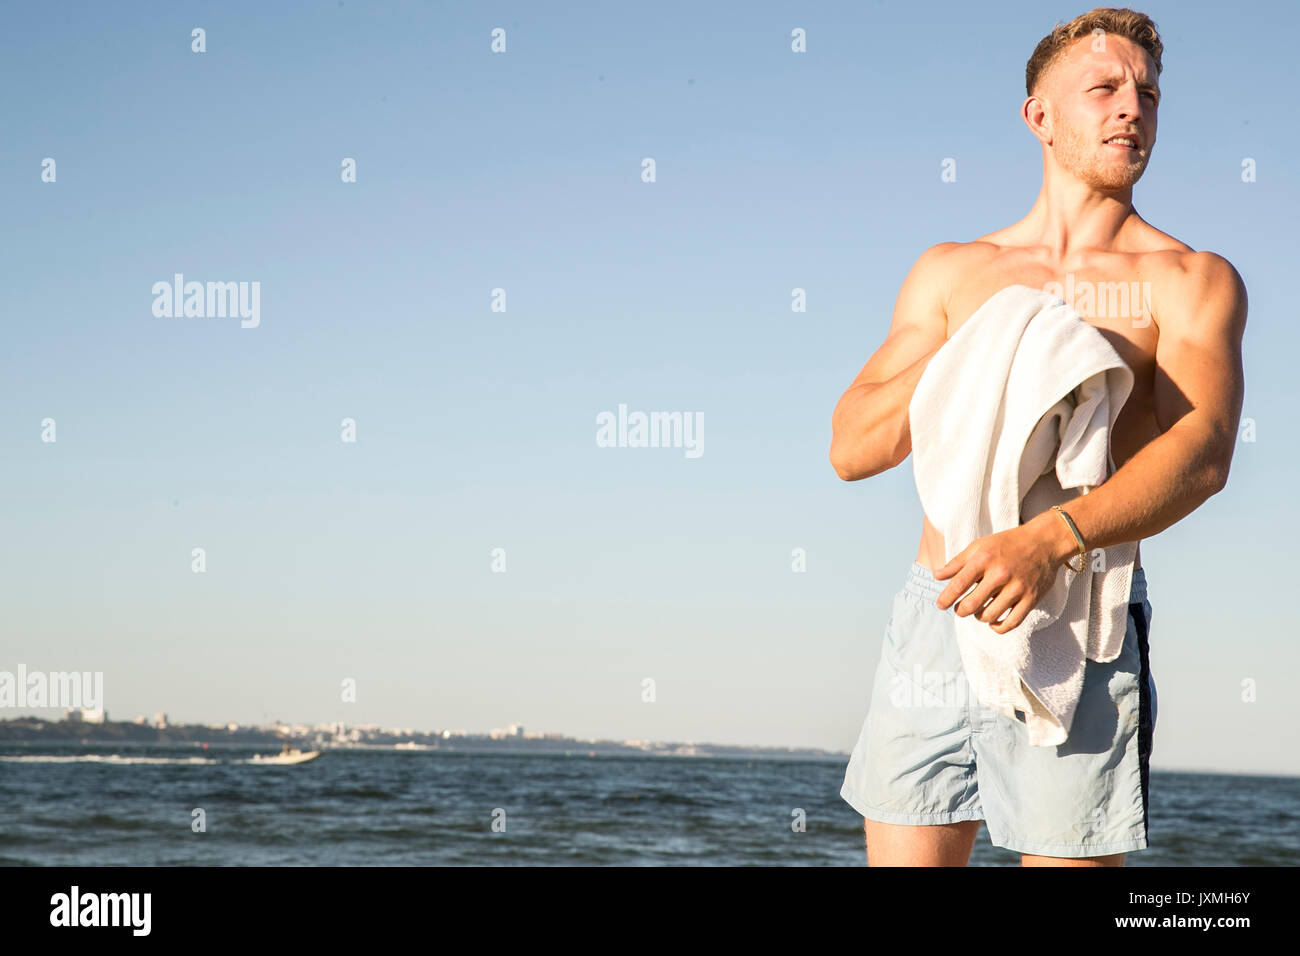 Young male swimmer drying himself with towel on beach Stock Photo